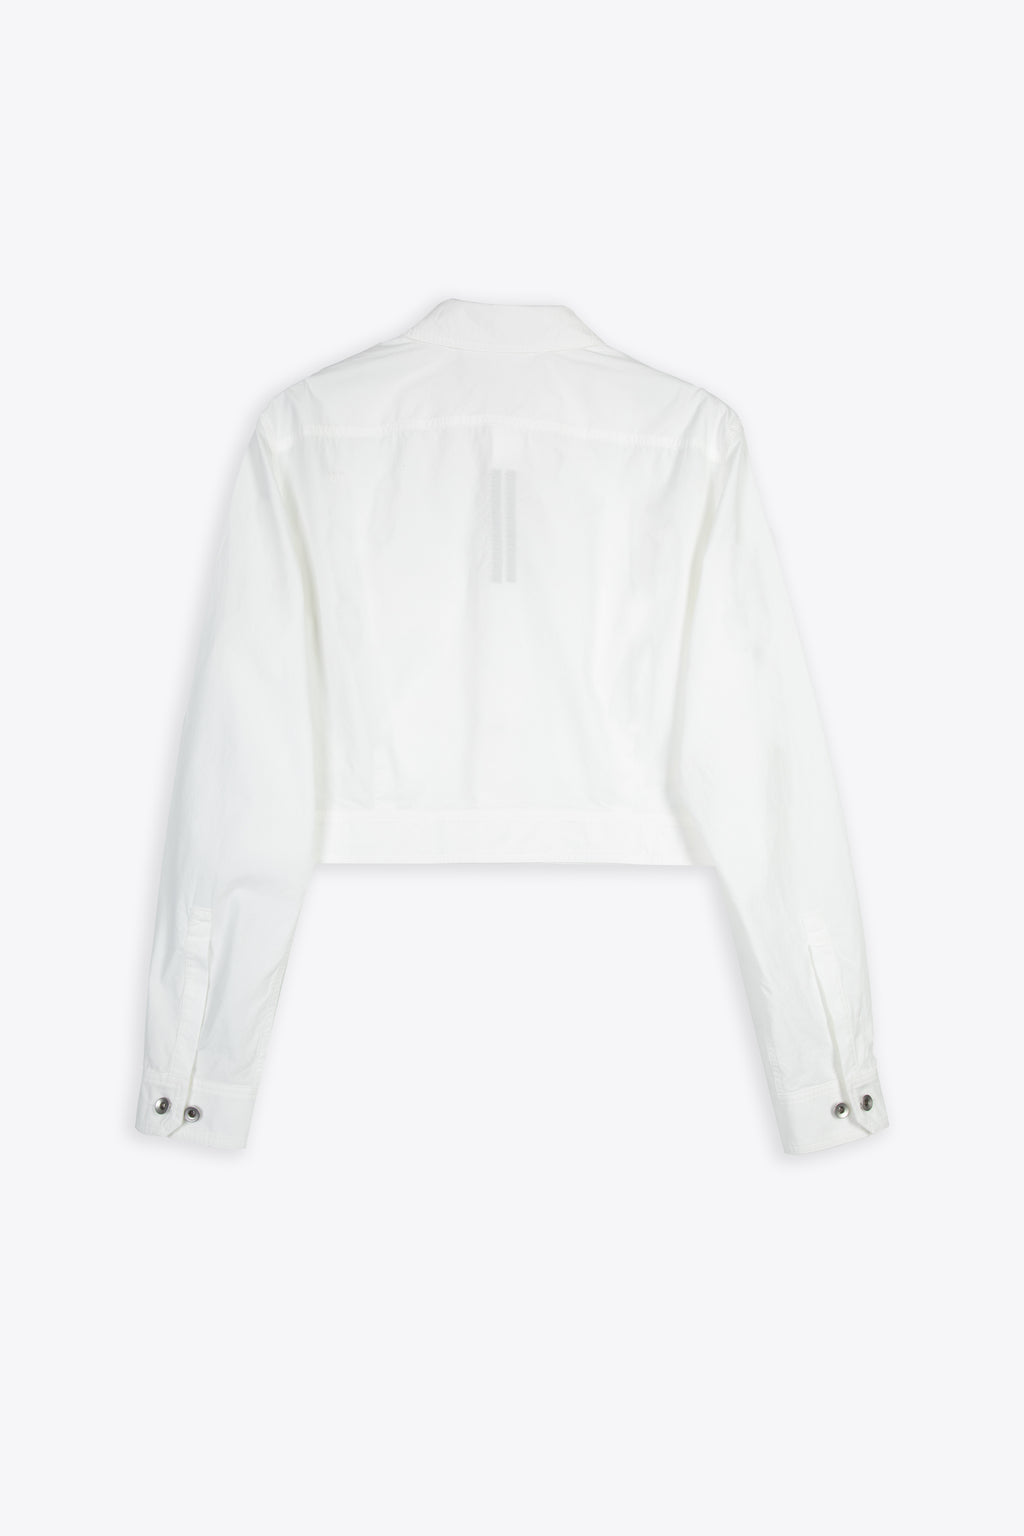 alt-image__White-poplin-cotton-outershirt---Cape-sleeve-cropped-outershirt-